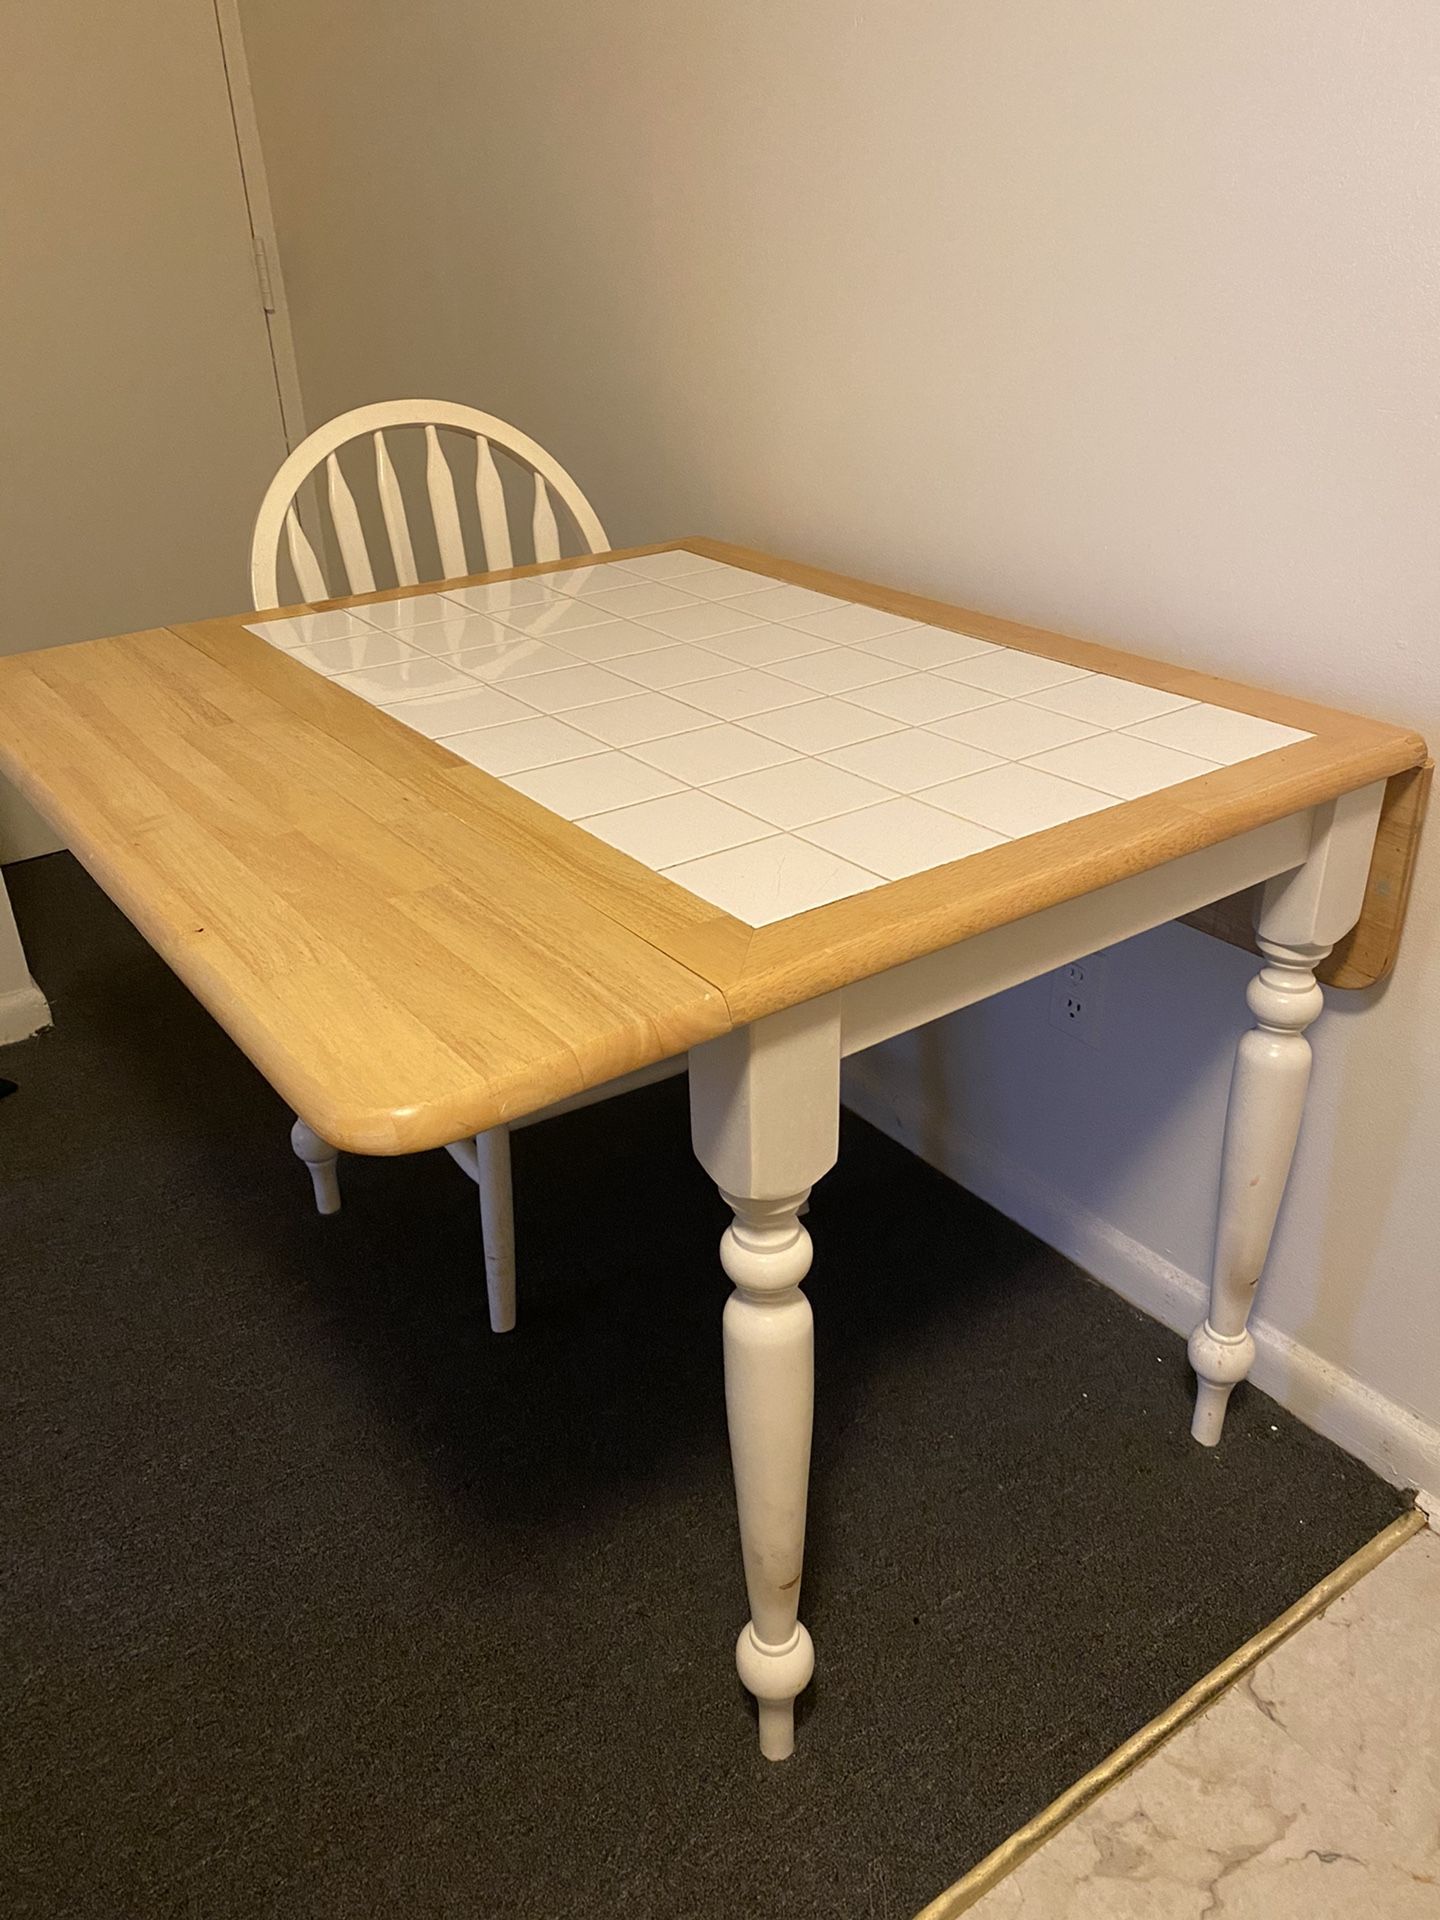 Kitchen table (3 matching chairs)